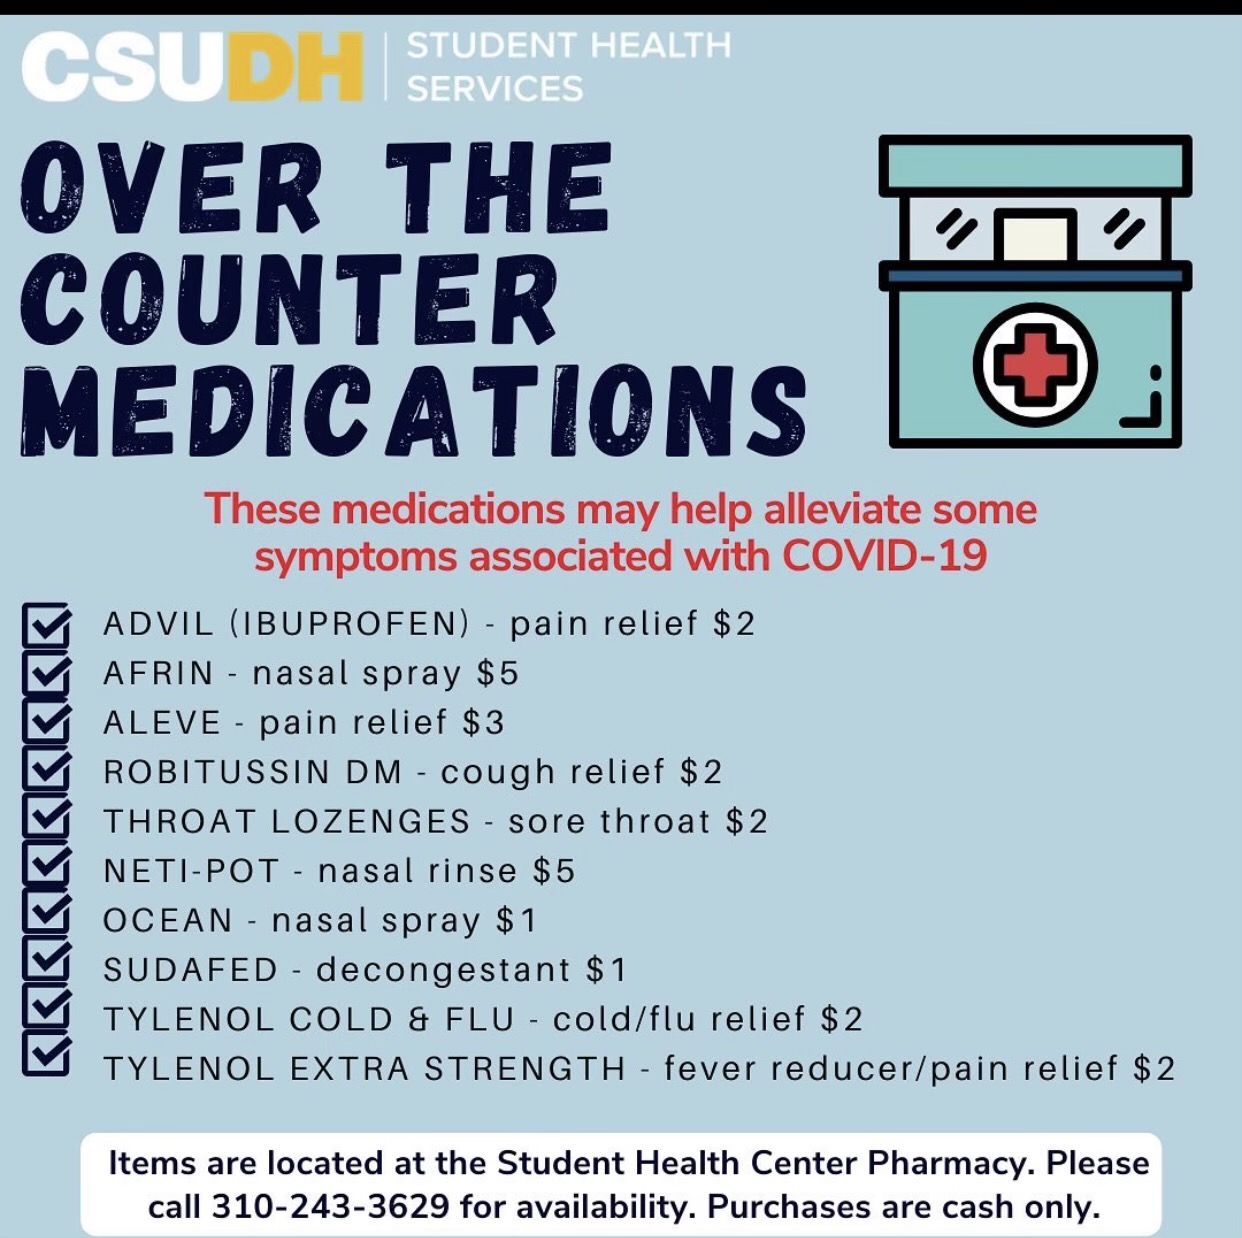 Empty store shelves? Student Services Health Pharmacy offers Medications